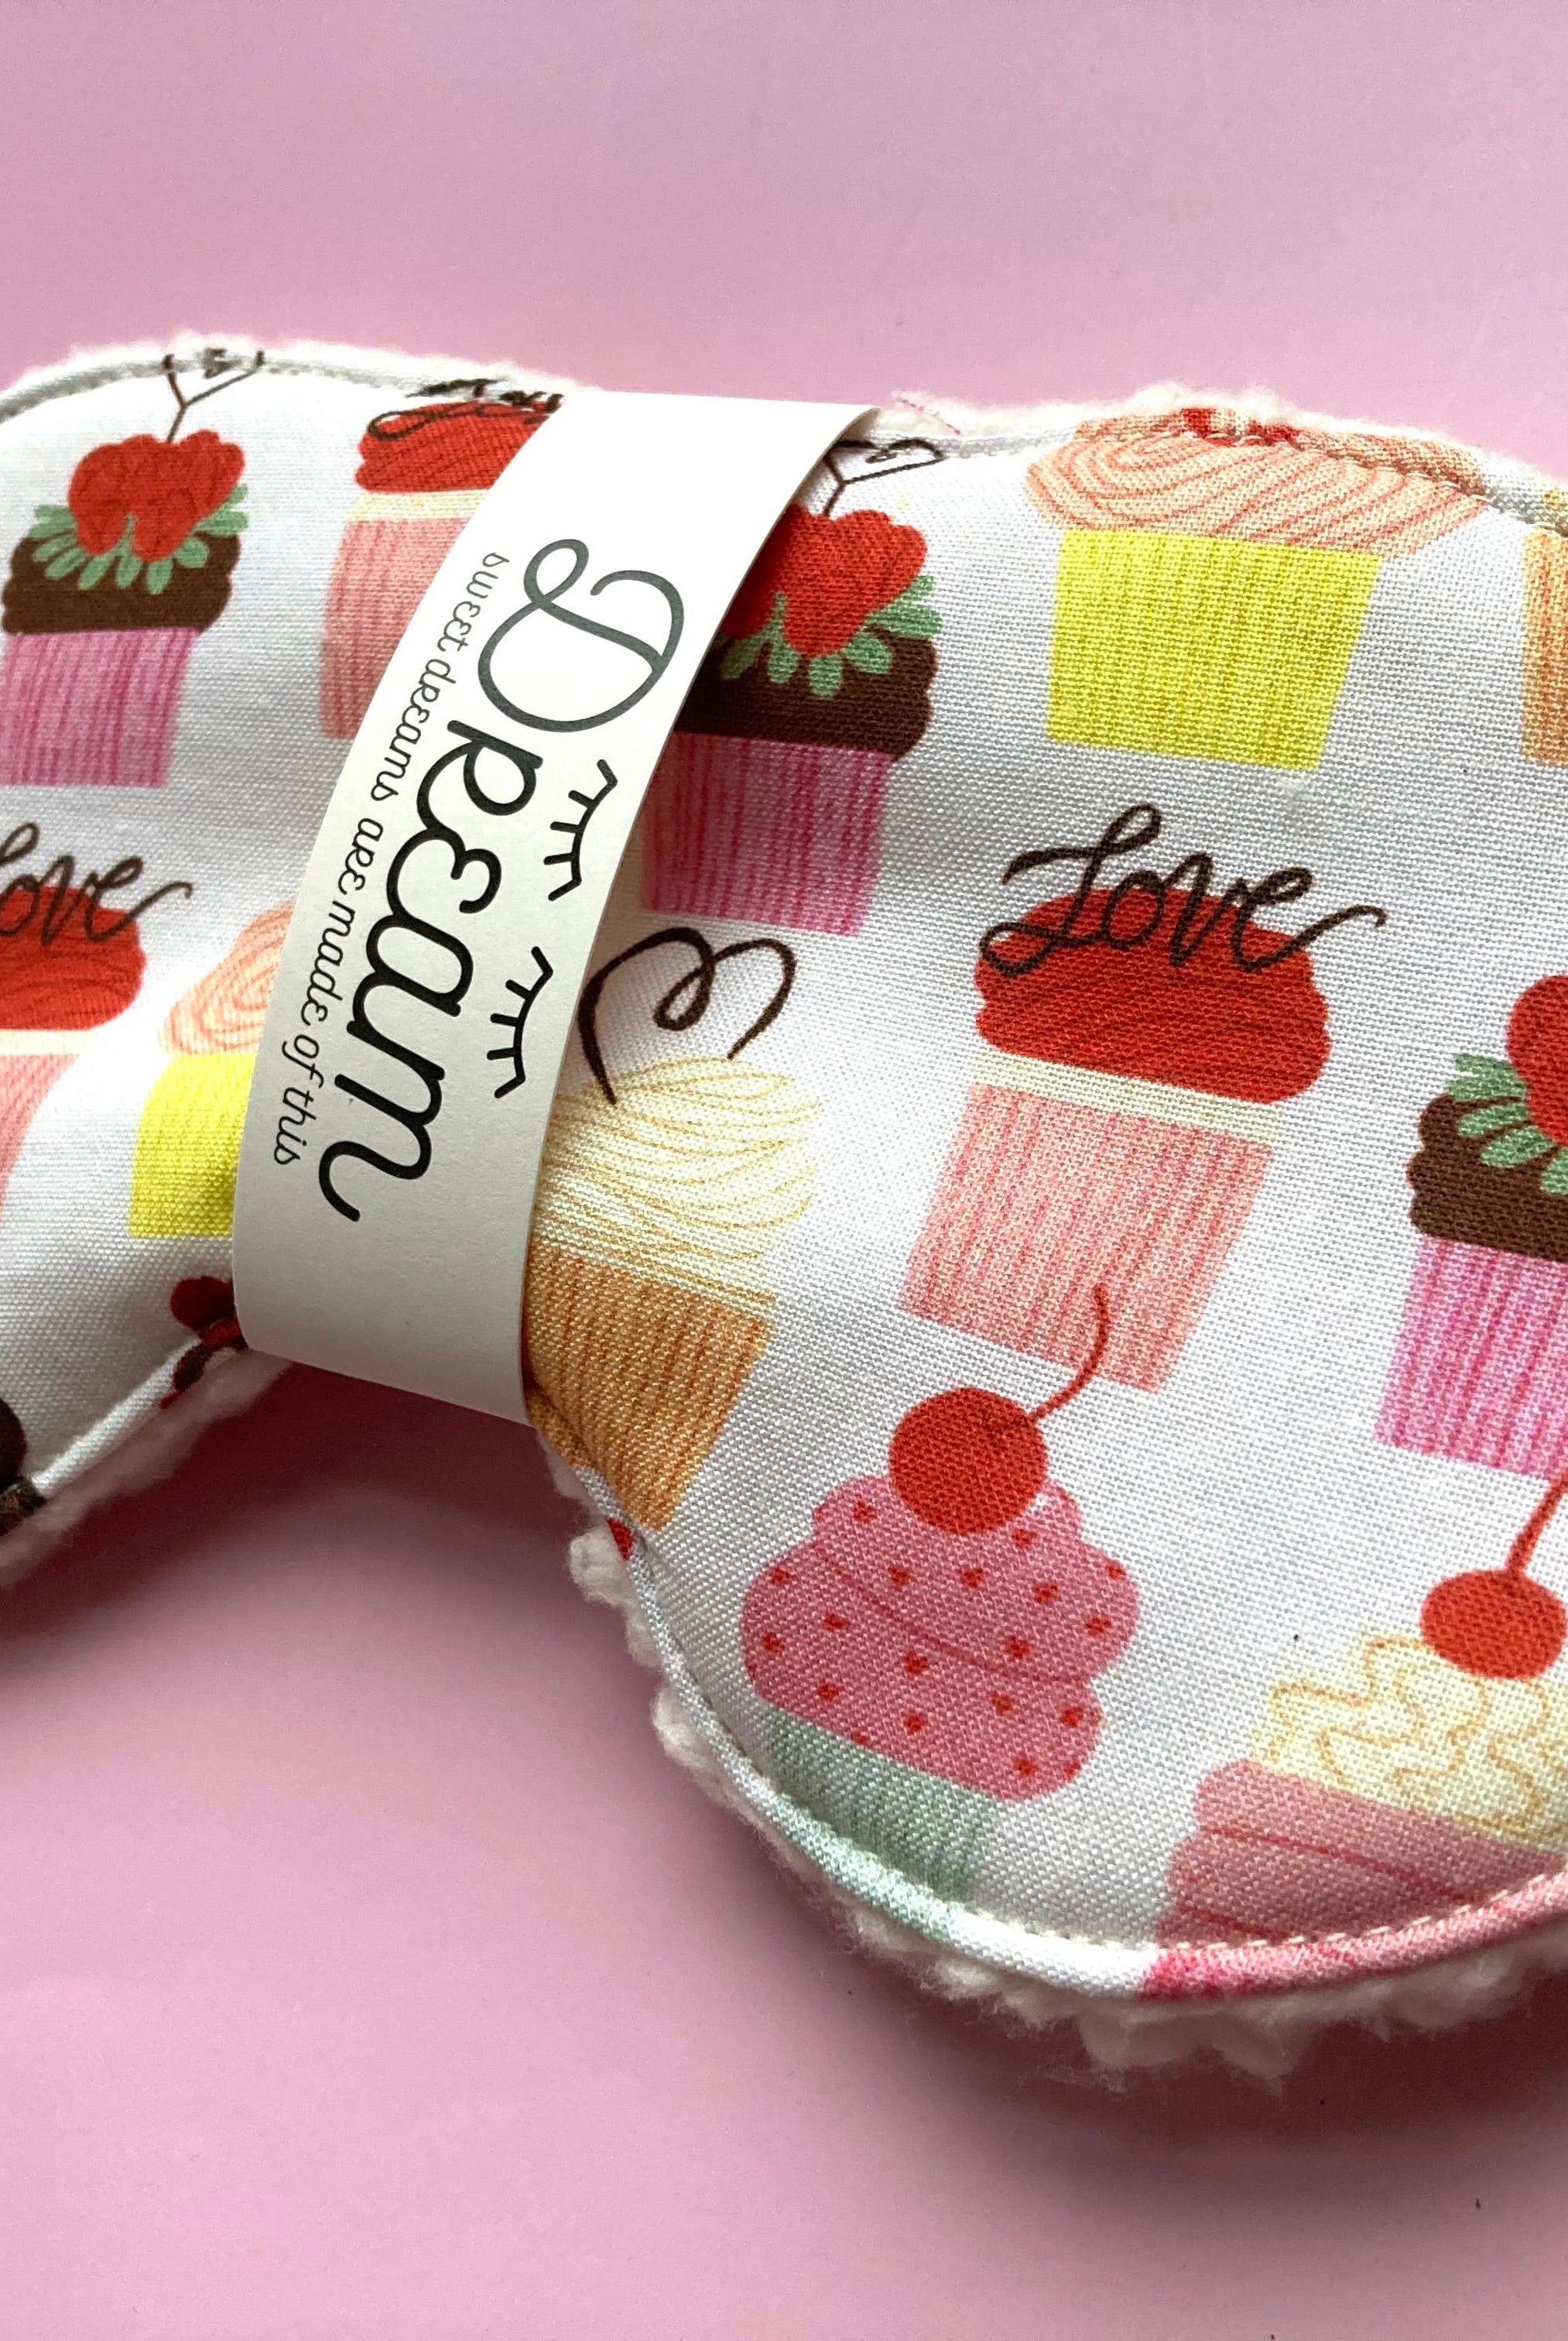 A Cupcake Sleep Mask by Little Man with a pattern of various cupcakes and the word "love" printed on it, infused with wild nurturer aromatherapy essential oil, displayed on a pink background.